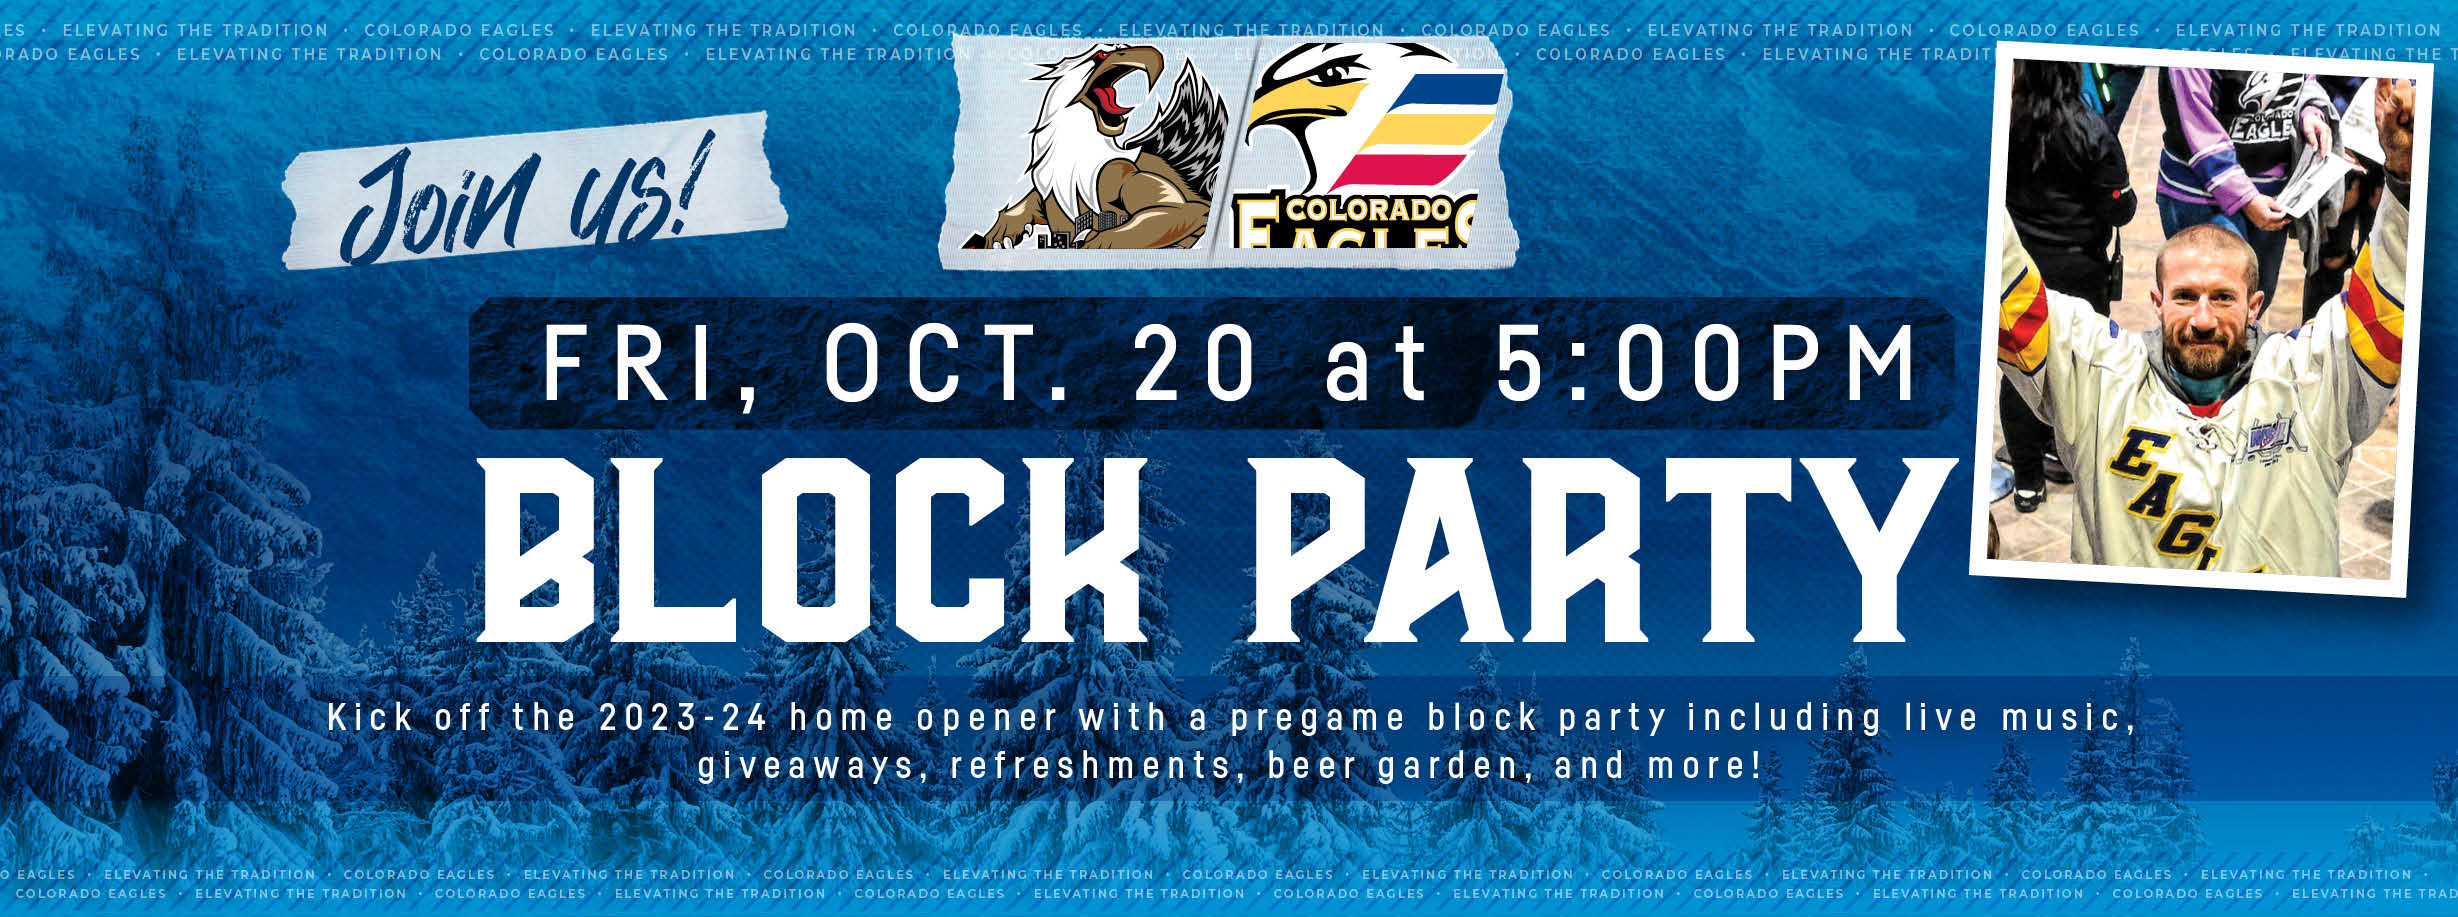 KICK OFF THE HOME OPENER WITH A PRE-GAME BLOCK PARTY!